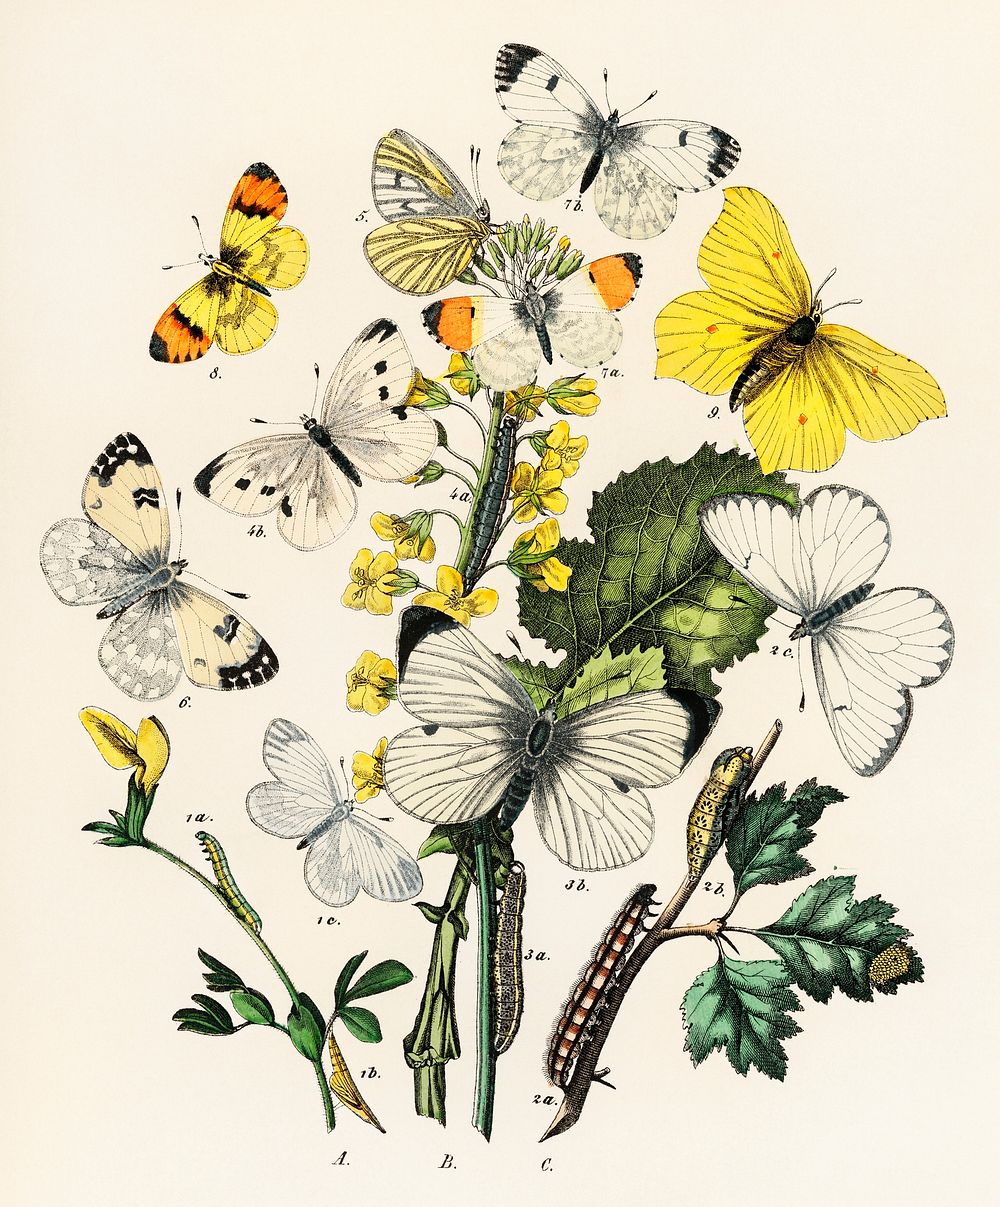 Illustrations from the book European Butterflies and Moths by William Forsell Kirby (1882), a kaleidoscope of fluttering…